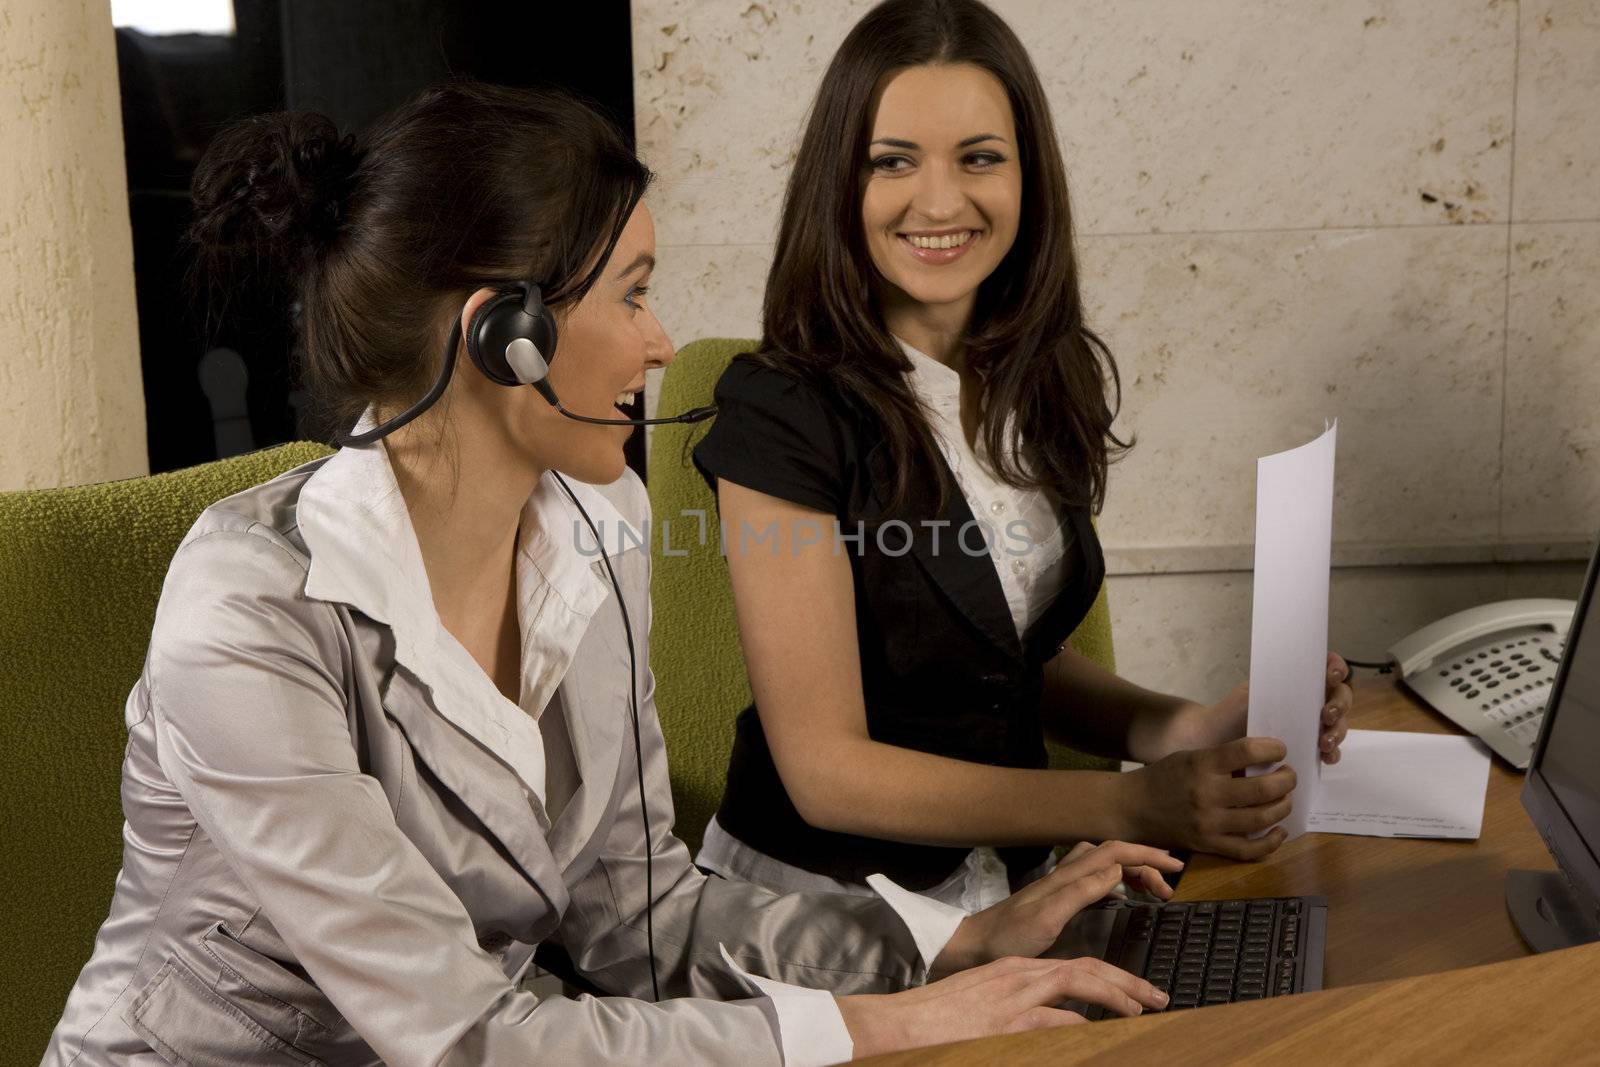 Two woman working in the office
How can I hel you?